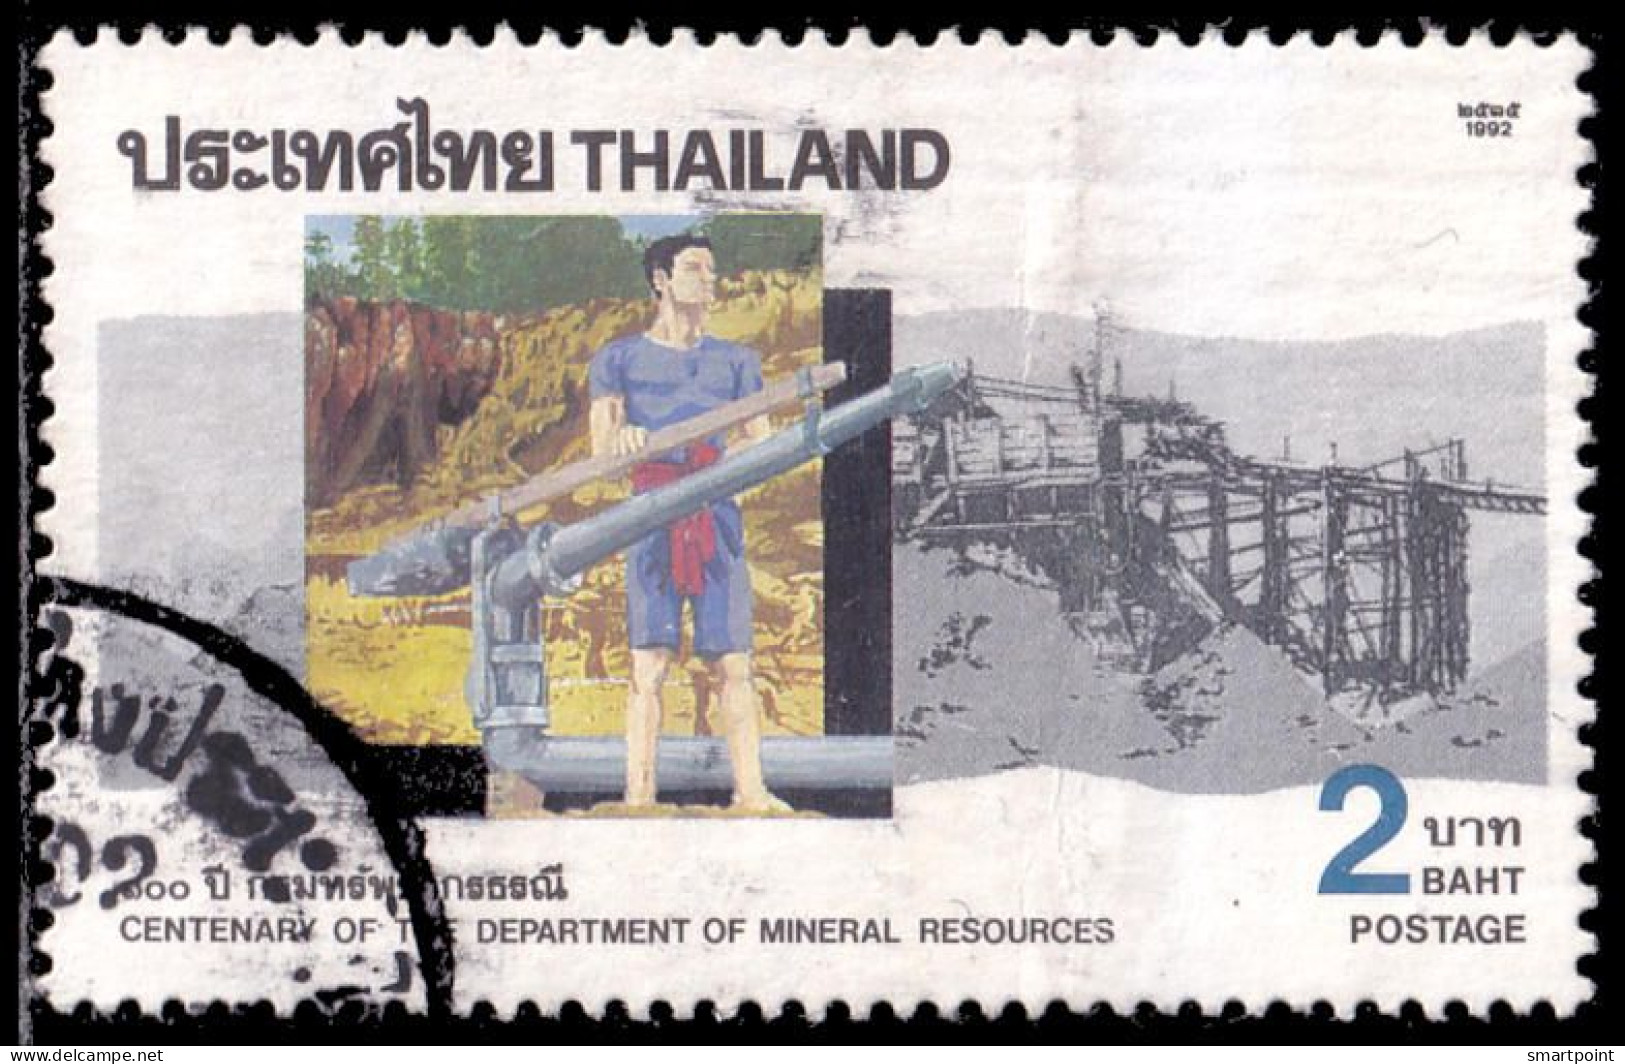 Thailand Stamp 1992 Centenary Of The Department Of Mineral Resources 2 Baht - Used - Thailand